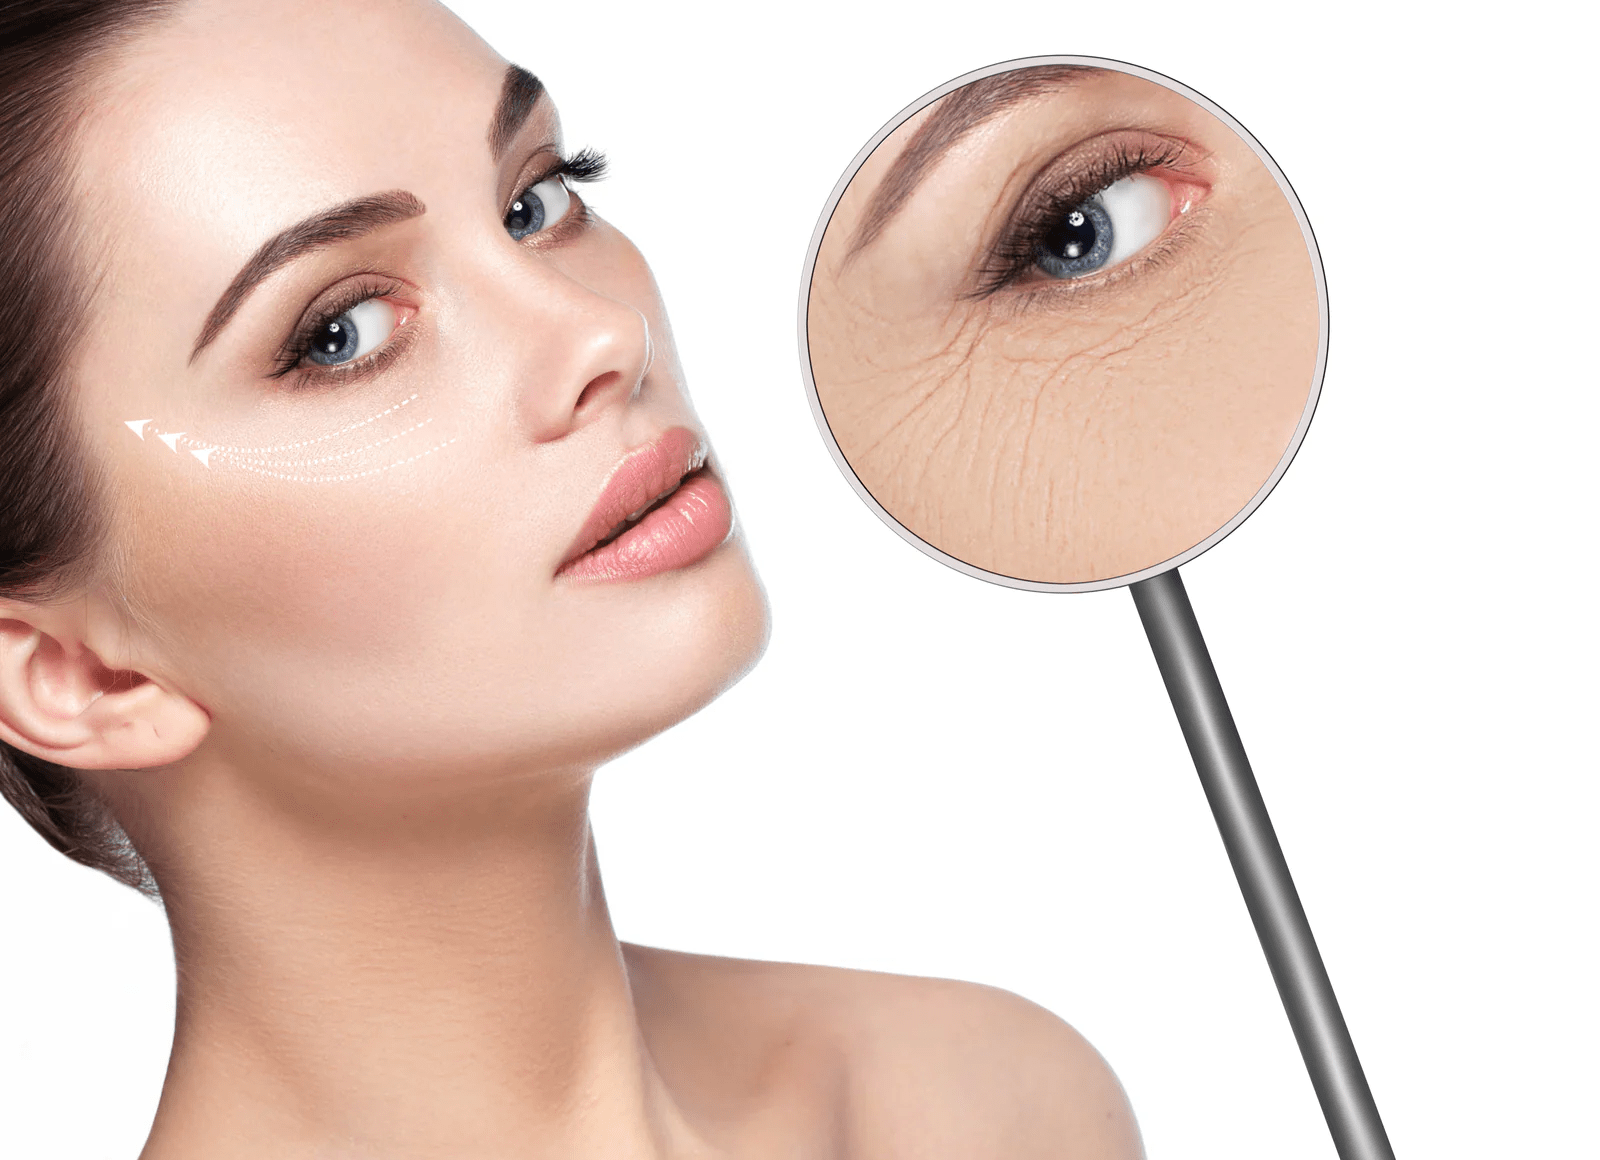 Beauty - Skin Care - Eye Care - Contours Rx Lids By Design - 7mm - Online  Shopping for Canadians